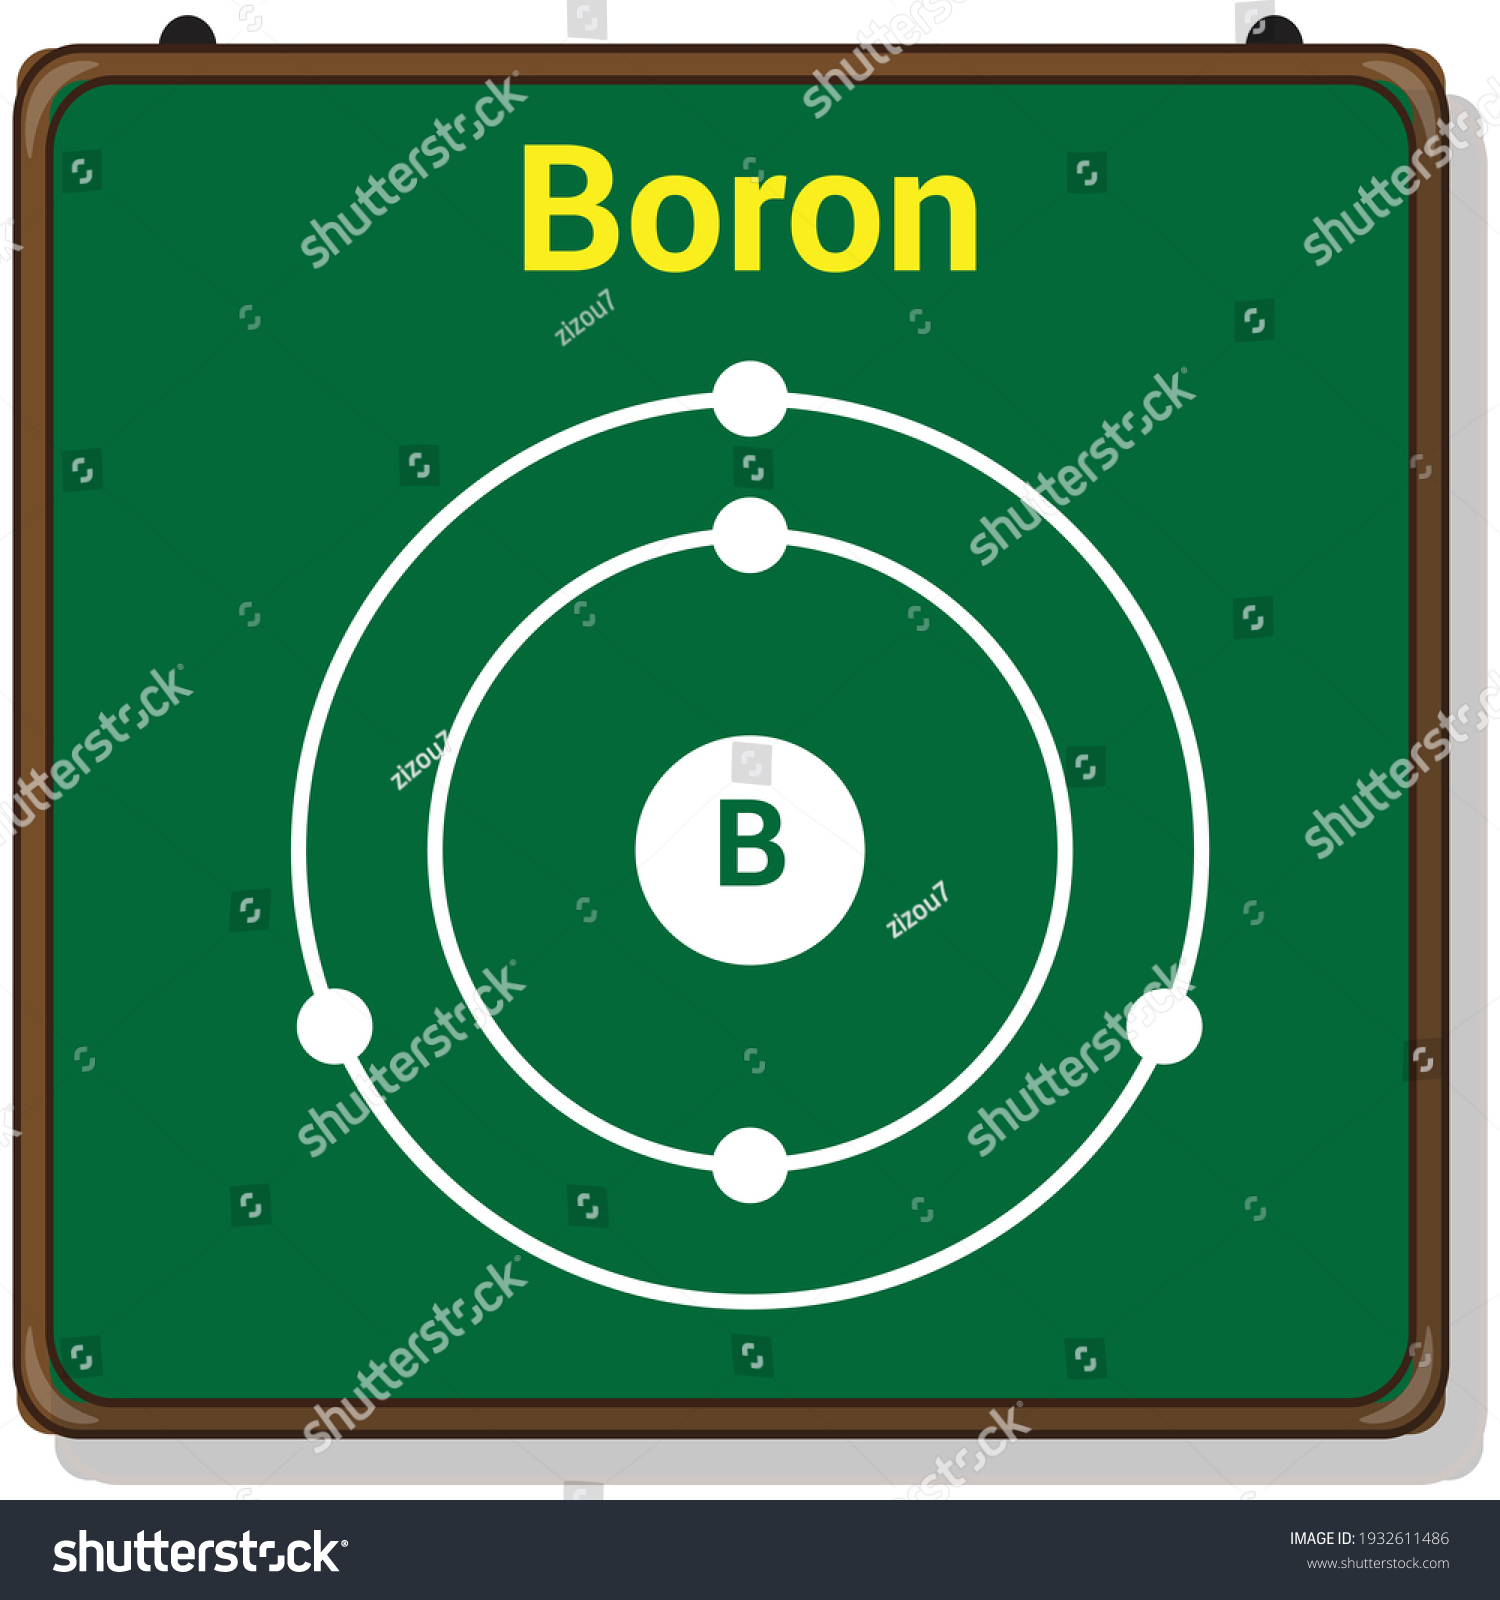 Bohr Model Of The Boron Atom Electron Structure Royalty Free Stock